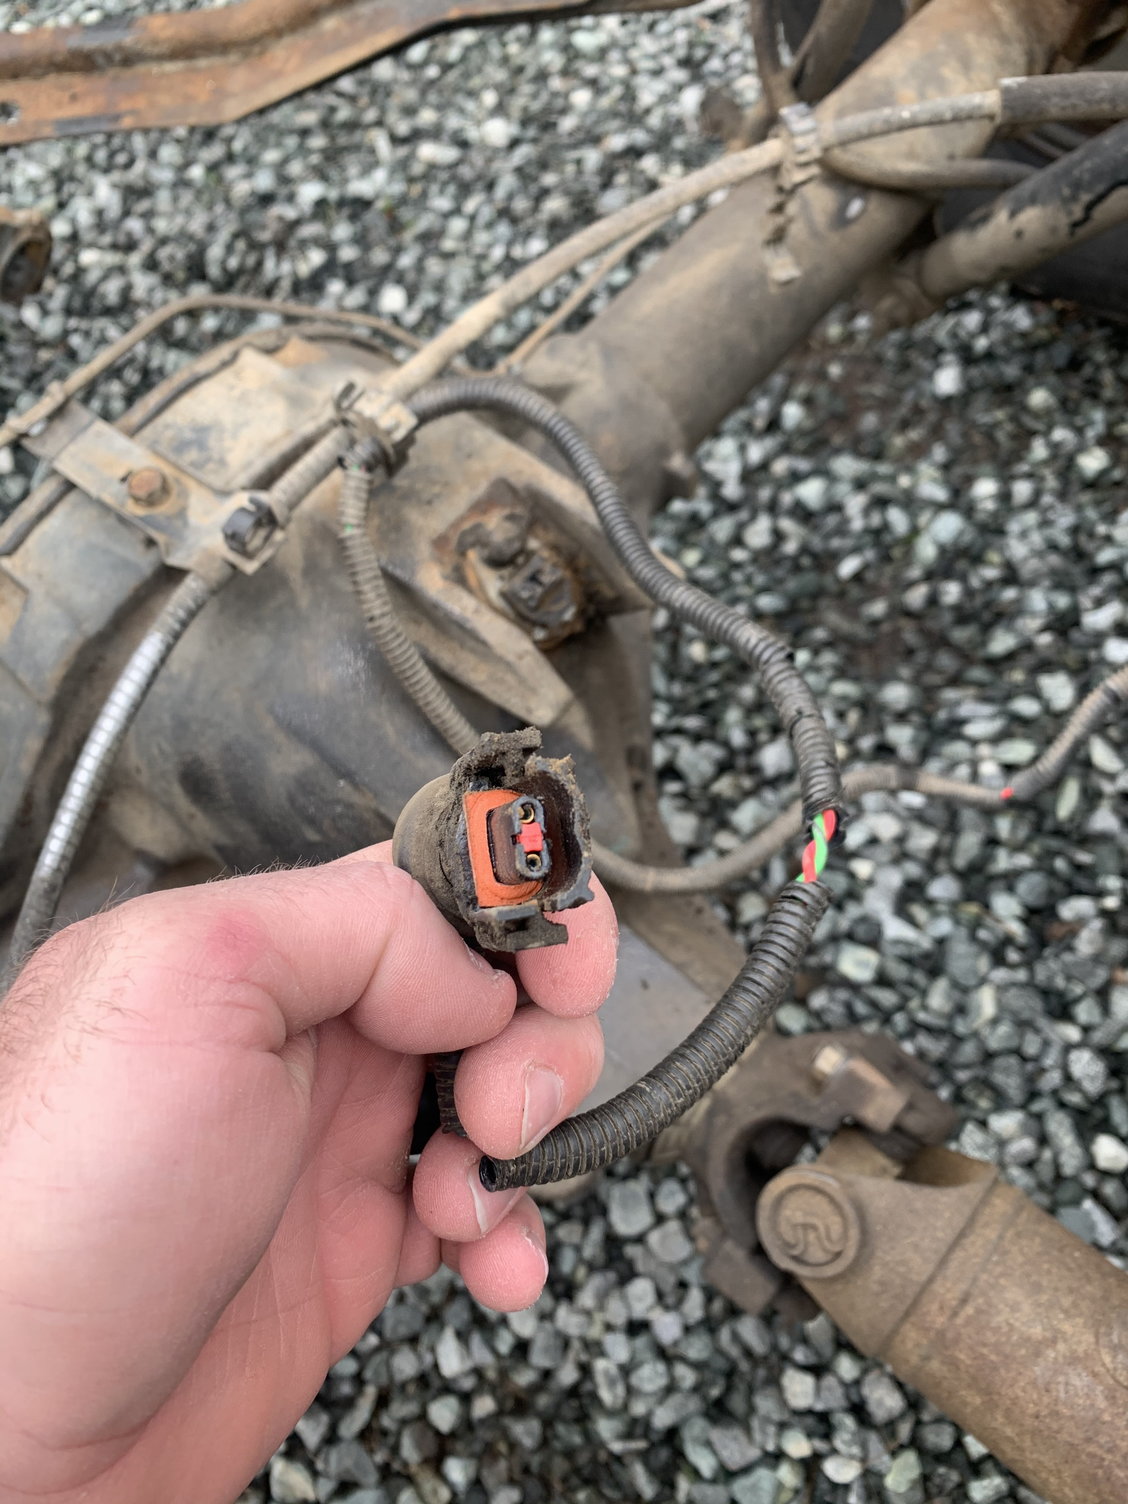 Please help: Tell me where this wiring harness goes - Ford F150 Forum